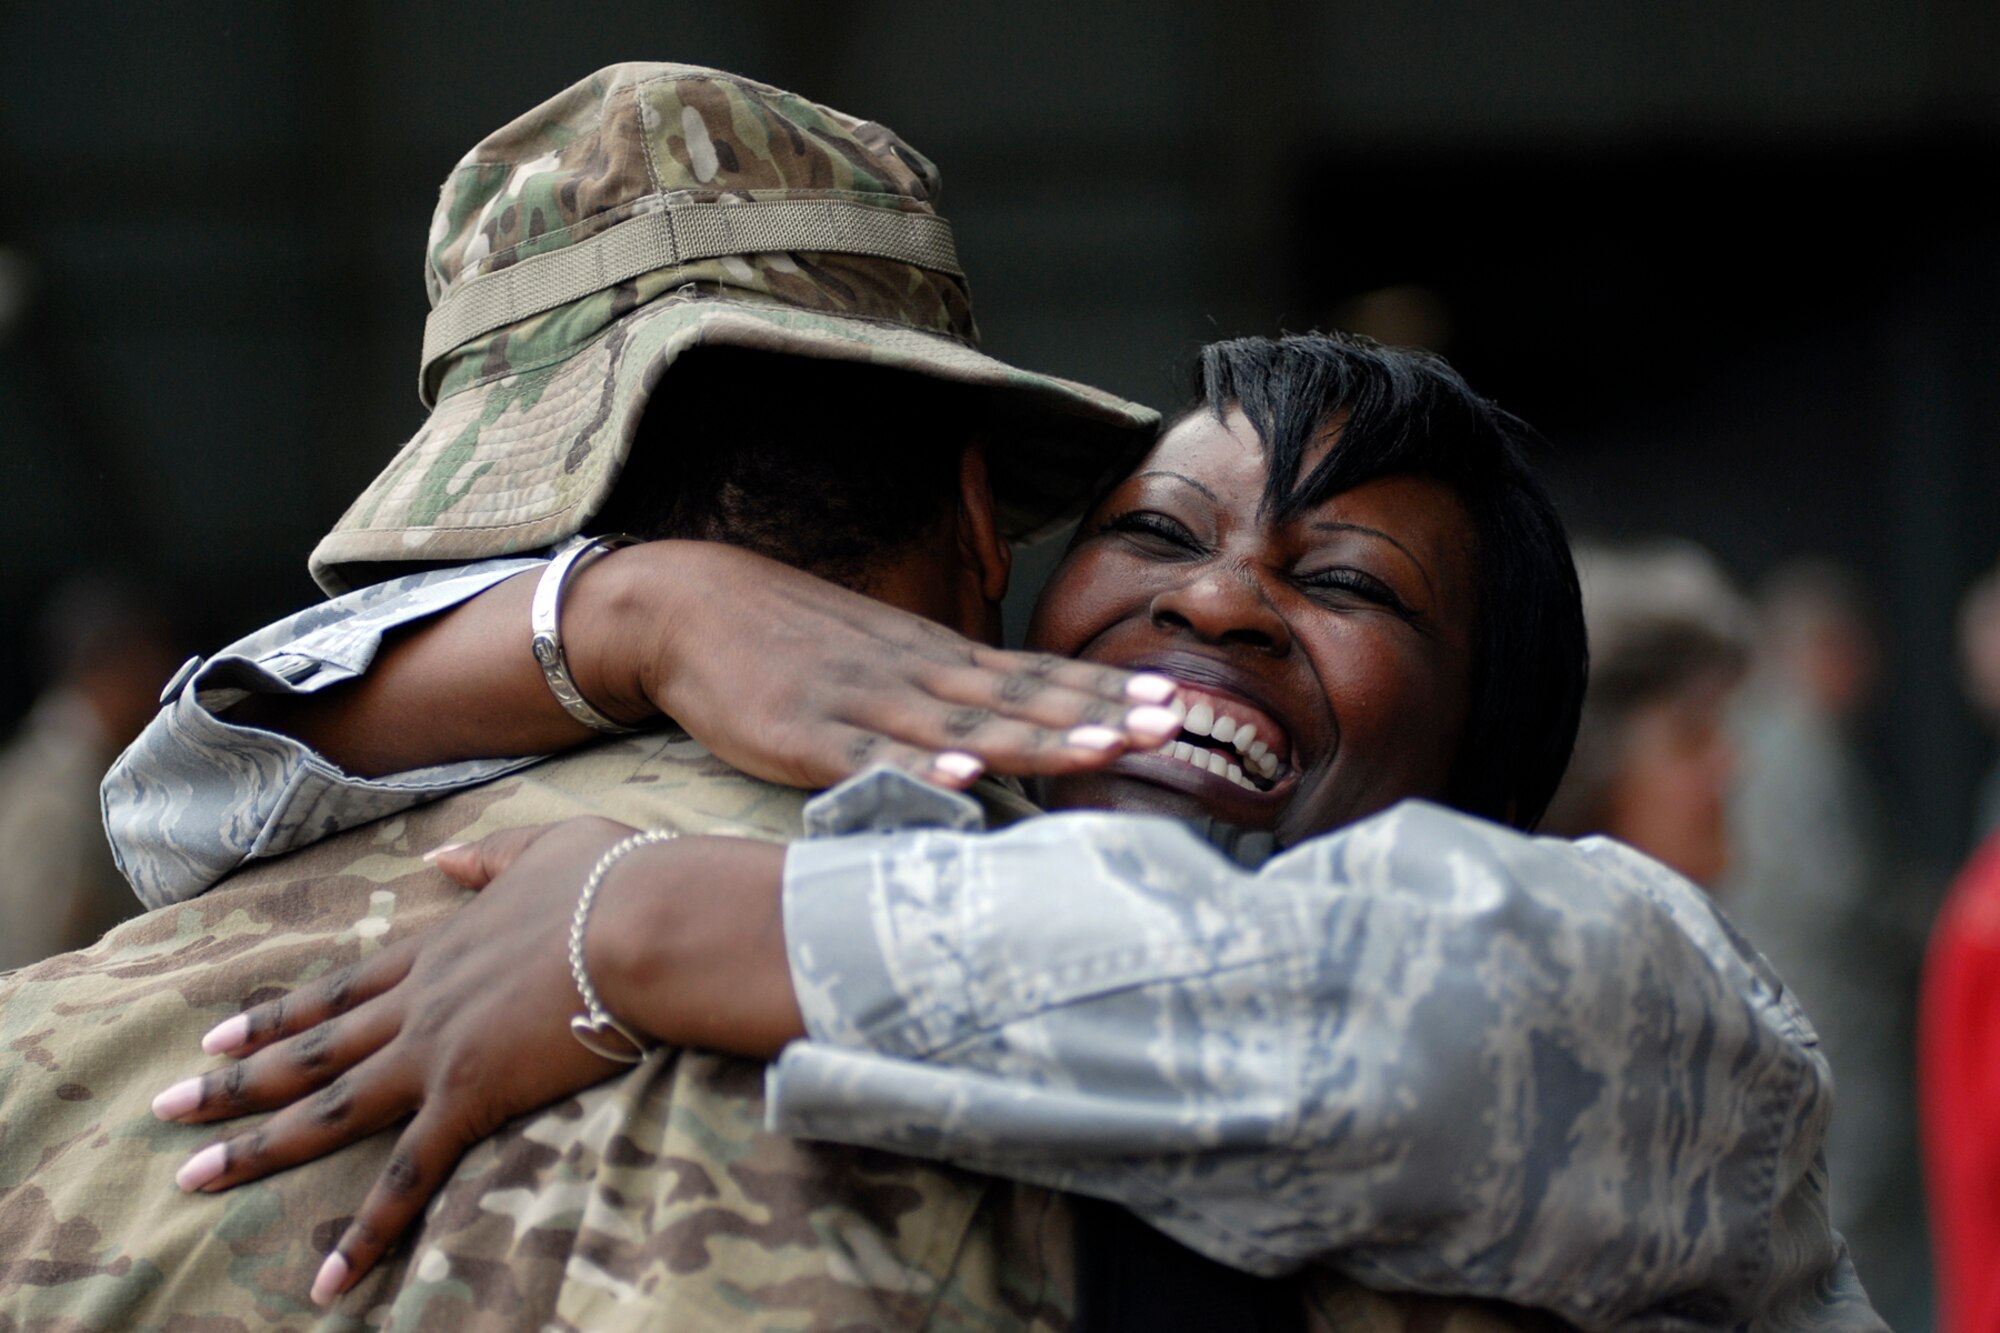 Personnel from the 169th Fighter Wing at McEntire Joint National Guard Base, S.C., return home to a hero's welcome after a four-month Air Expeditionary Force deployment at Kandahar Airfield, Afghanistan, Aug. 22, 2012. Swamp Fox F-16's, pilots, and support personnel began their AEF deployment in support of Operation Enduring Freedom in early April to take over flying missions for the air tasking order and provide close air support for troops on the ground in Afghanistan. 
